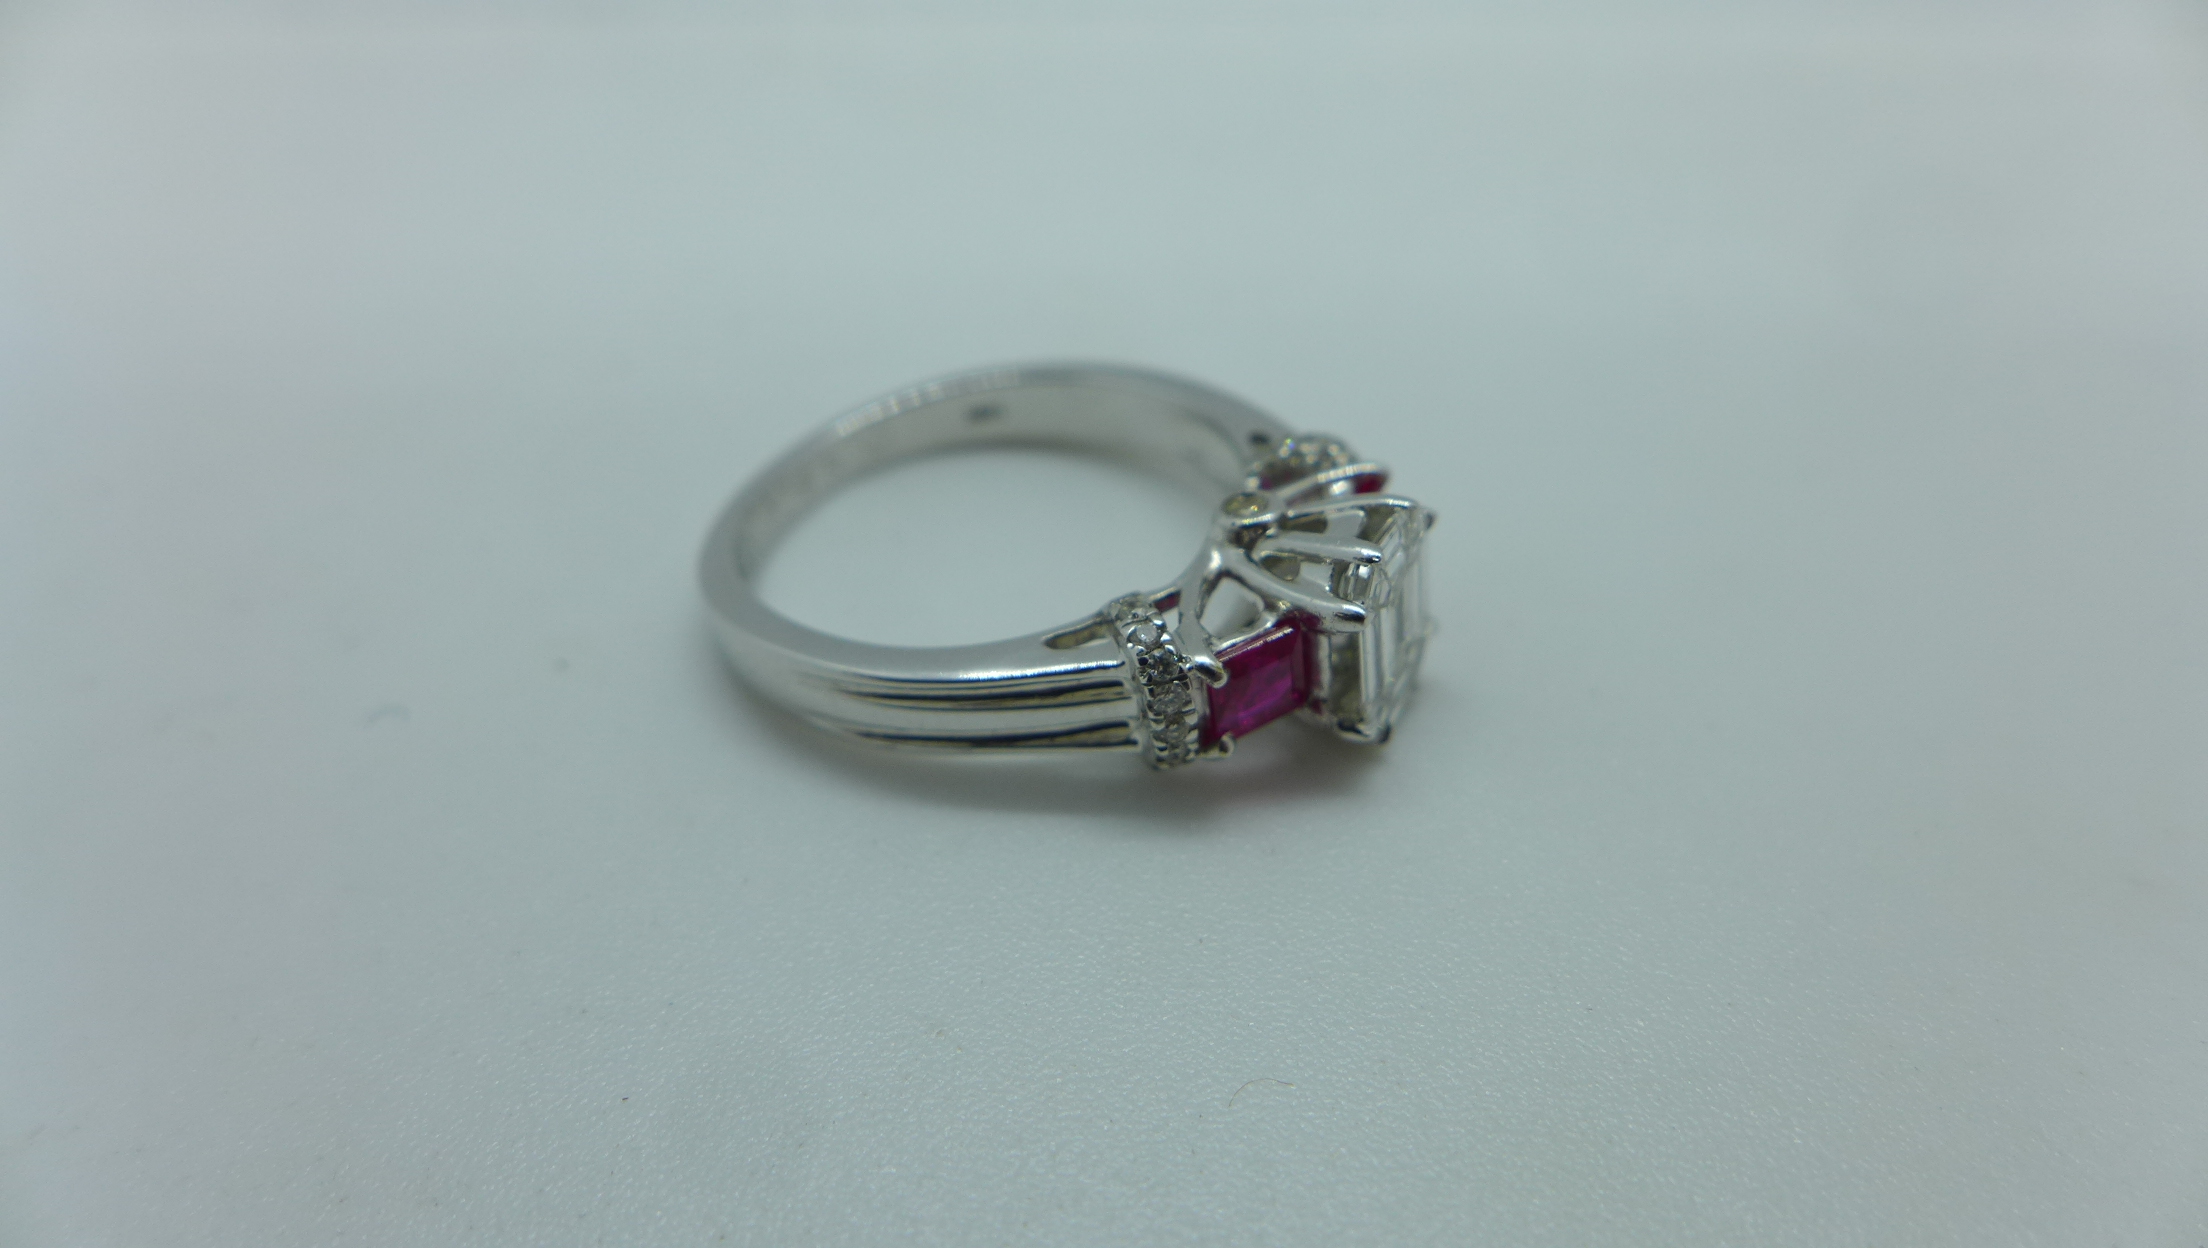 An 18ct white gold diamond and ruby ring with a centre 9 piece diamond, emerald cut measuring 7mm - Image 3 of 4